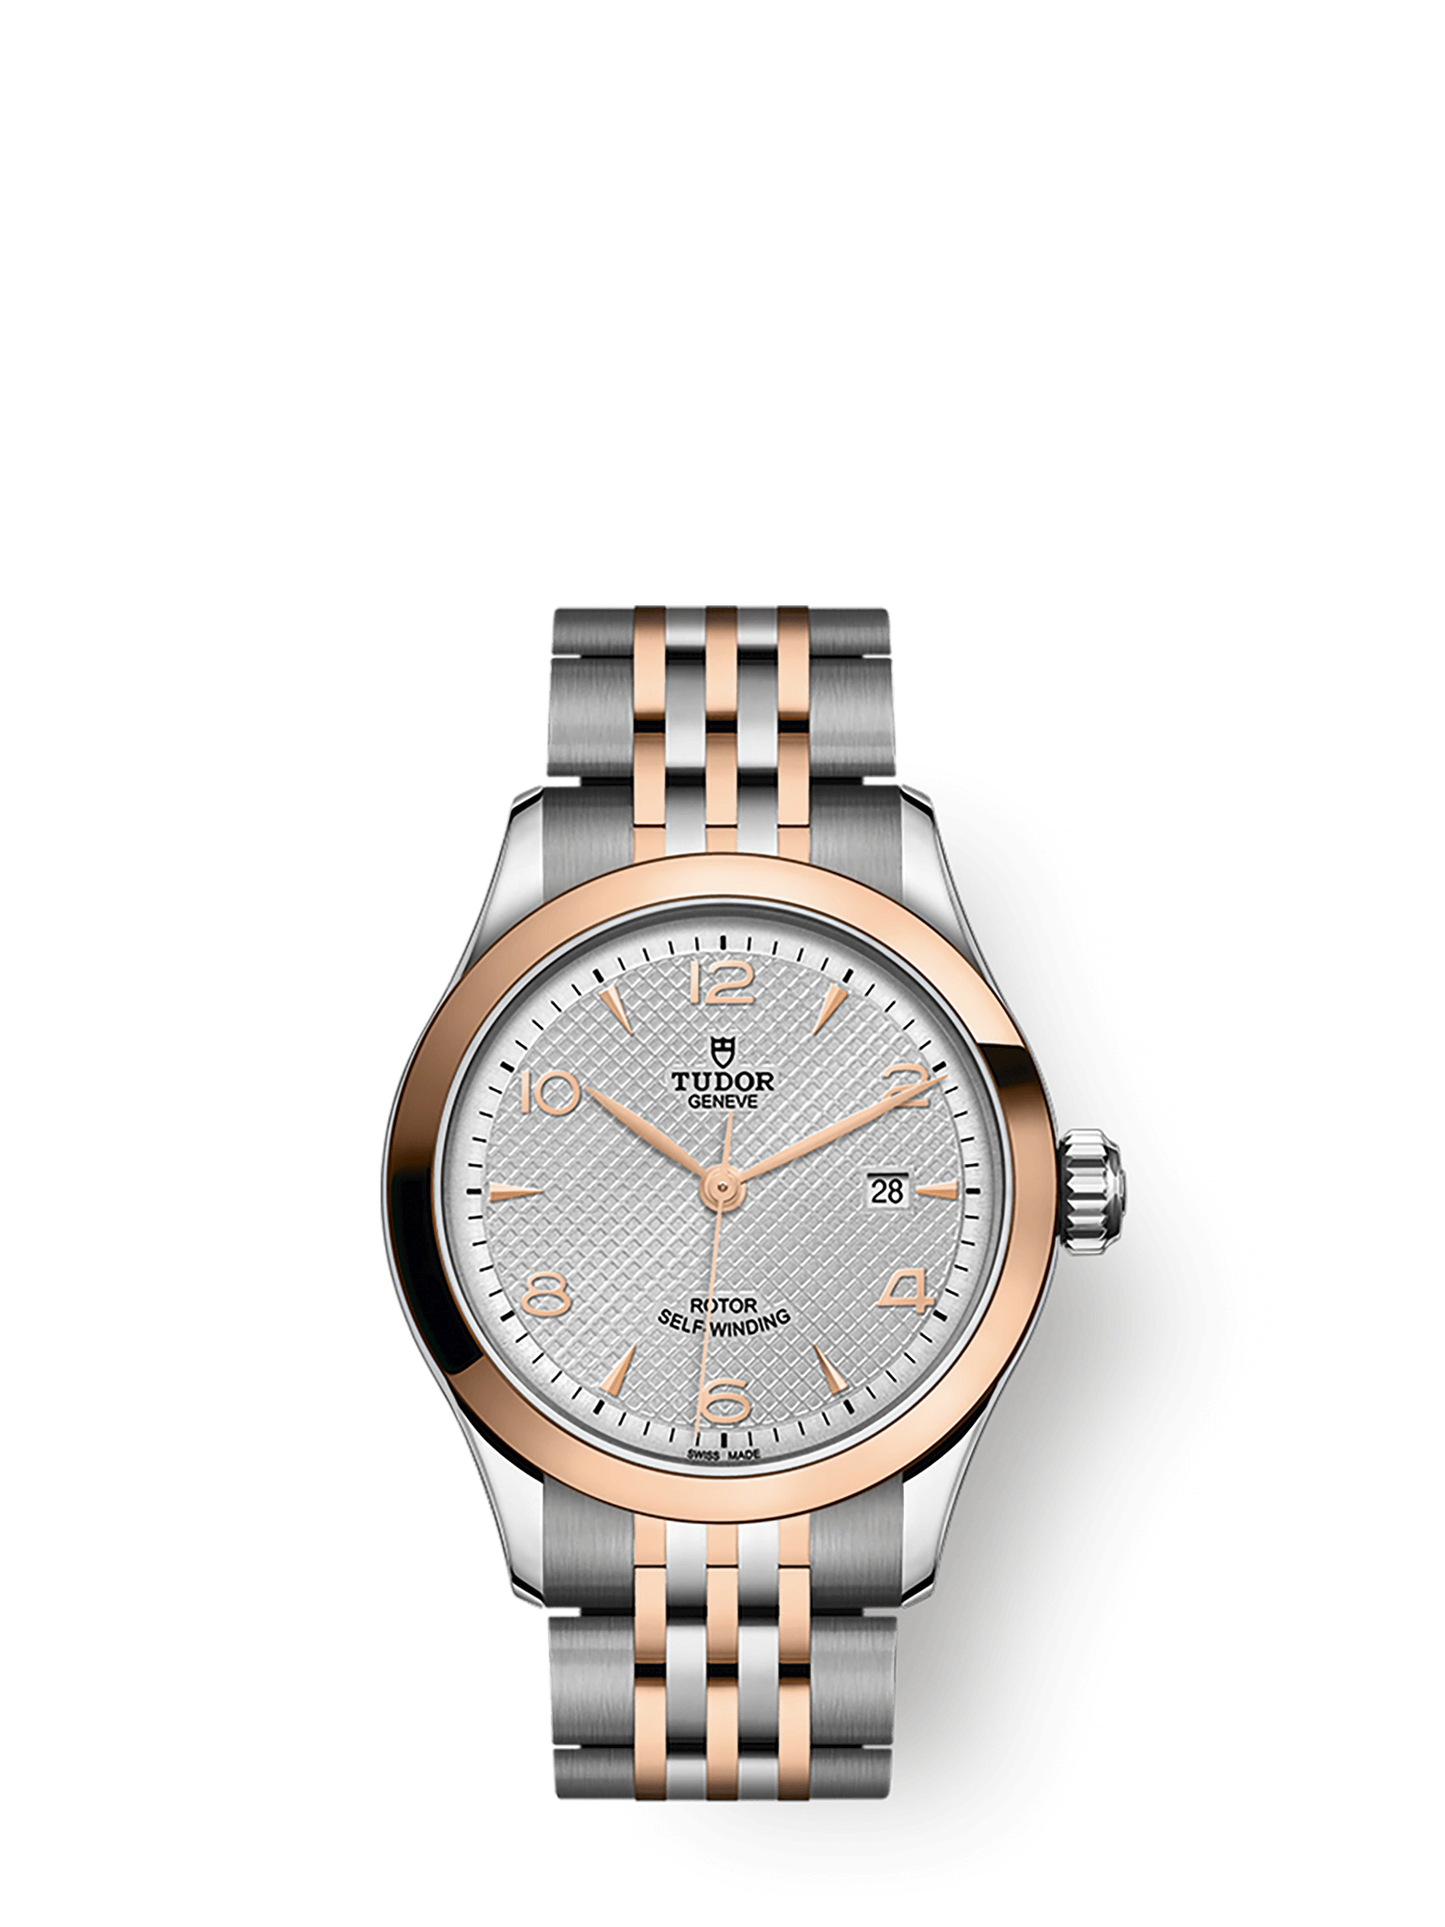 Tudor 1926, Stainless Steel and 18k Rose Gold, 28mm, Ref# M91351-0001